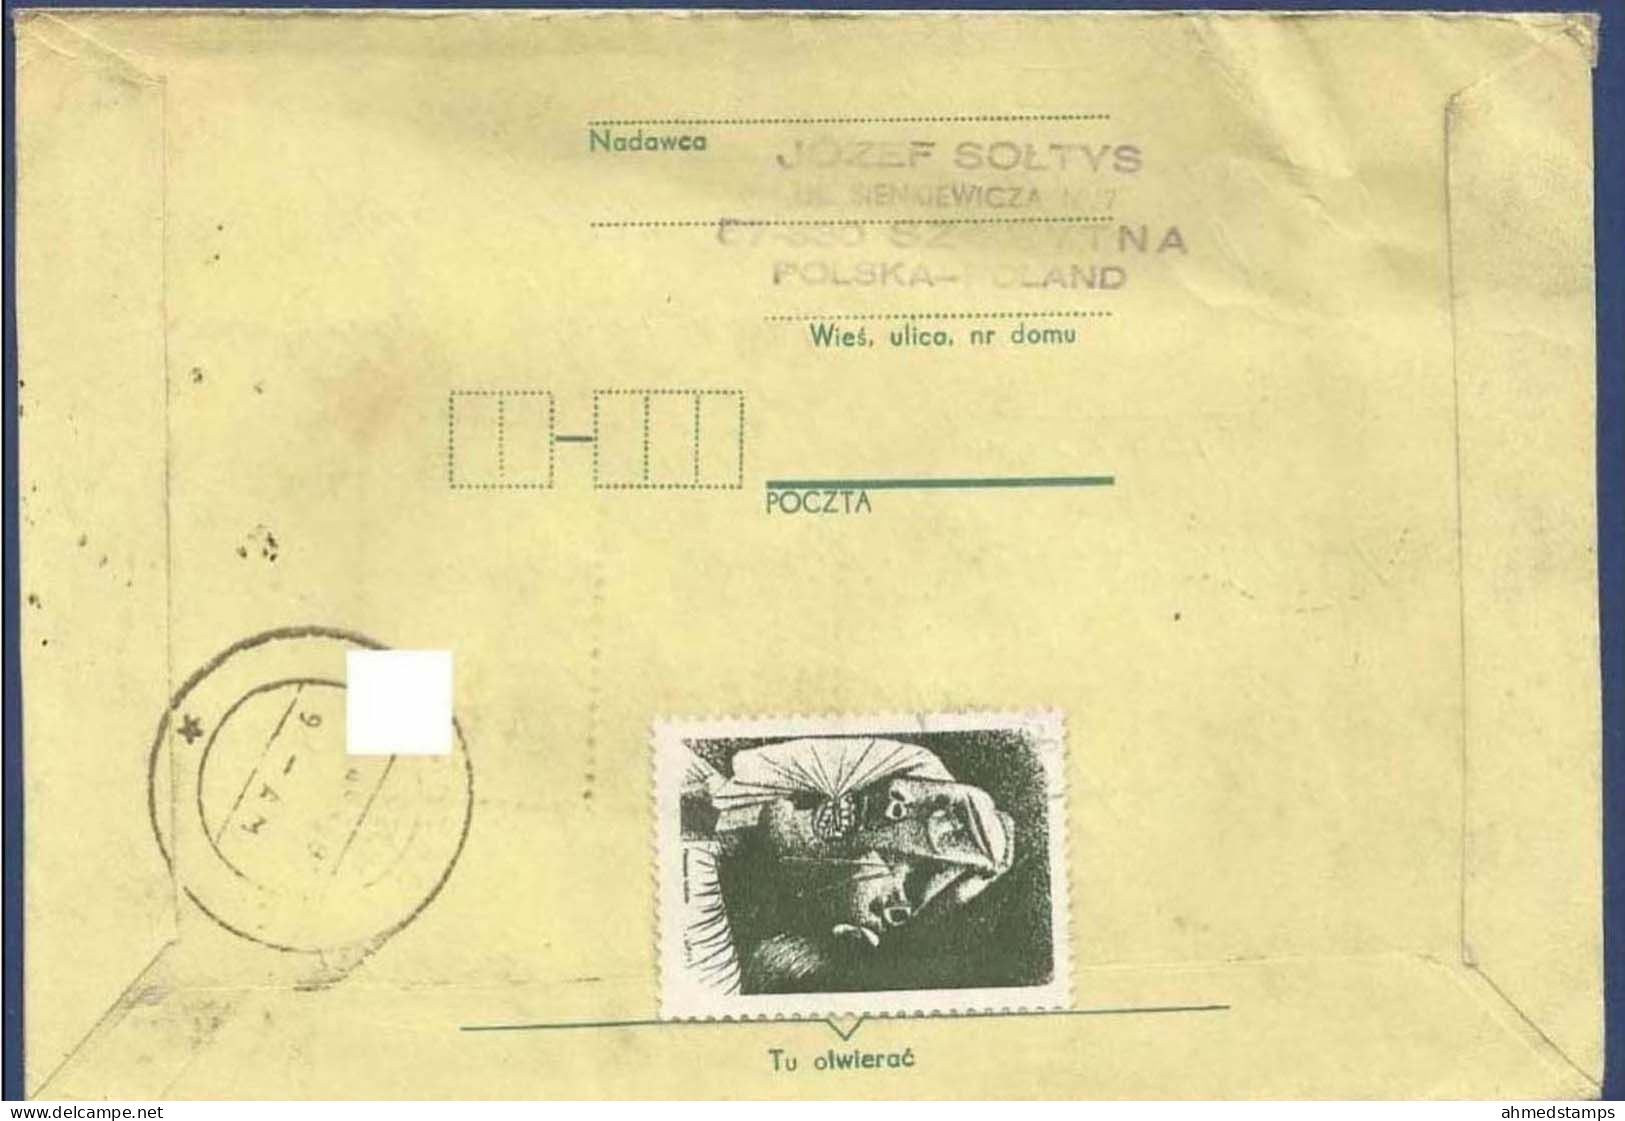 POLAND POSTAL USED AIRMAIL COVER TO PAKISTAN FLOWER FLOWERS - Unclassified